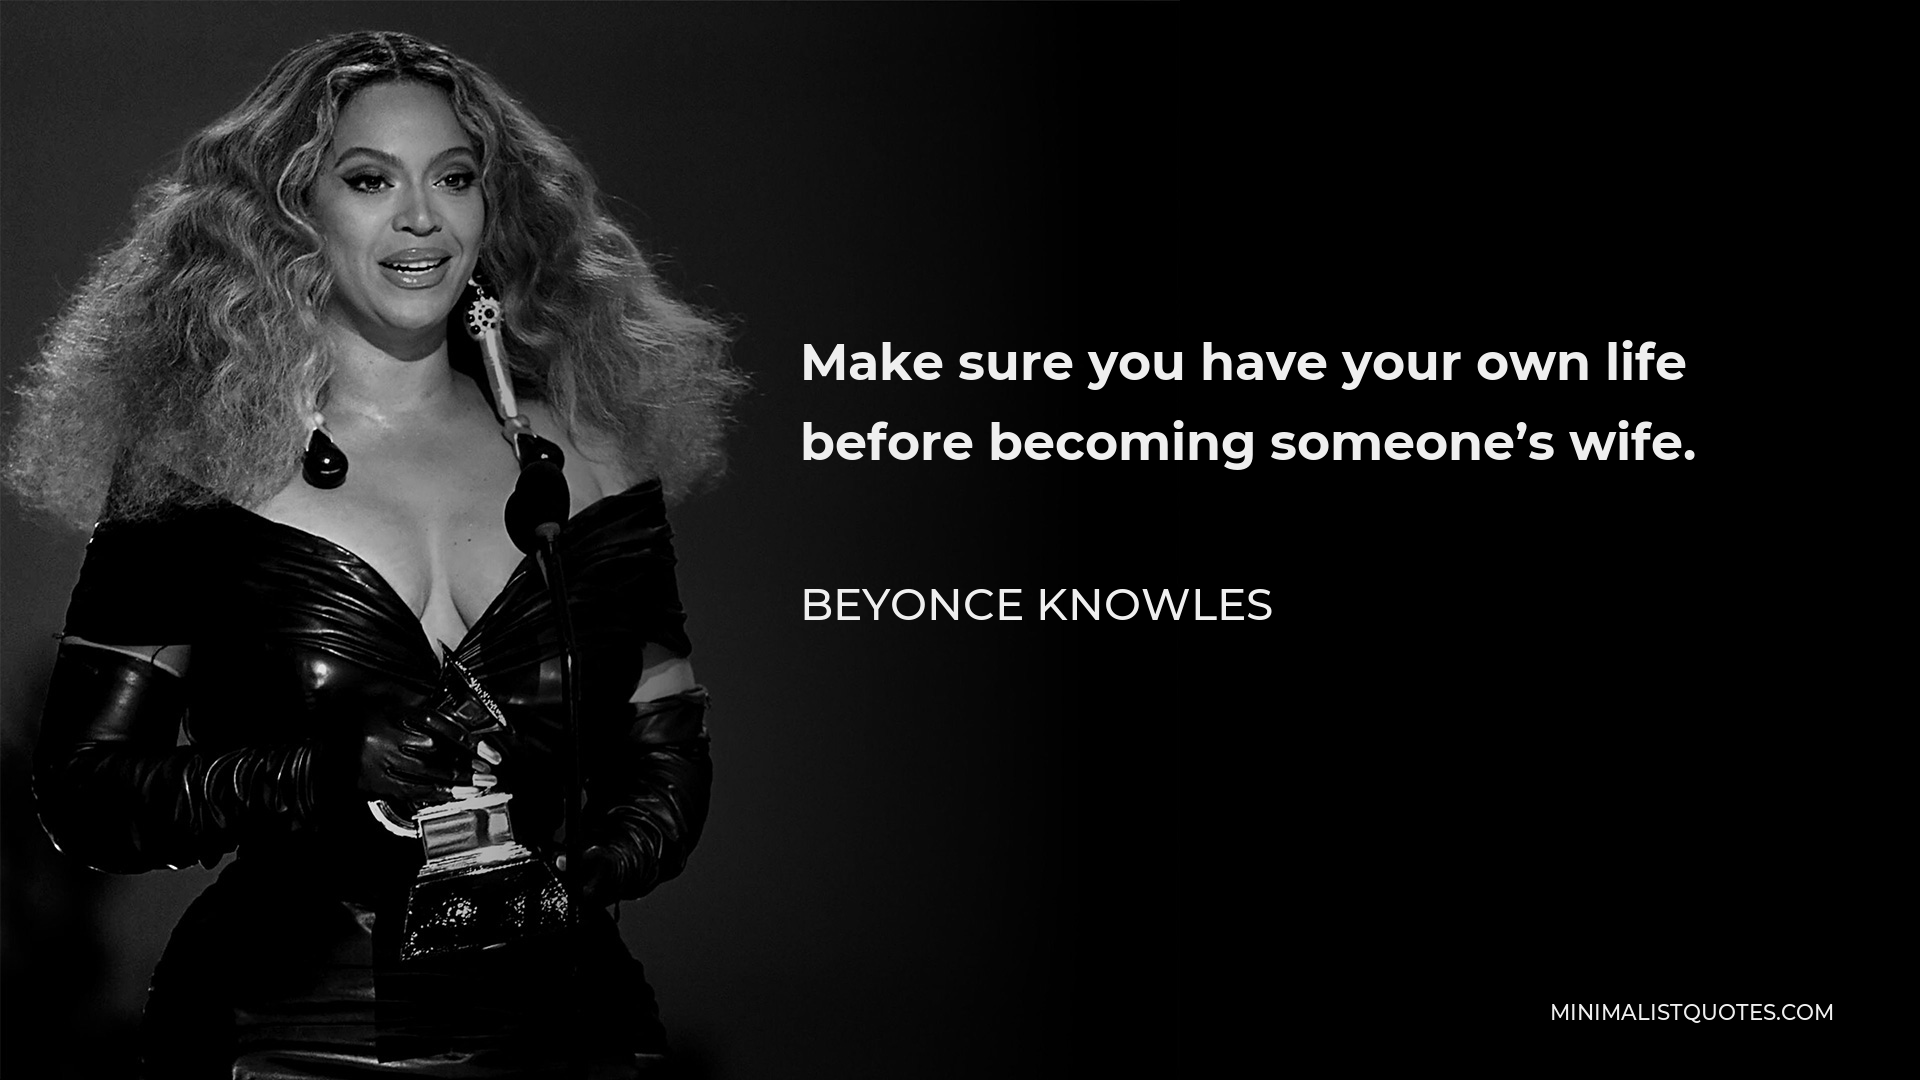 Beyonce Knowles Quote - Make sure you have your own life before becoming someone’s wife.